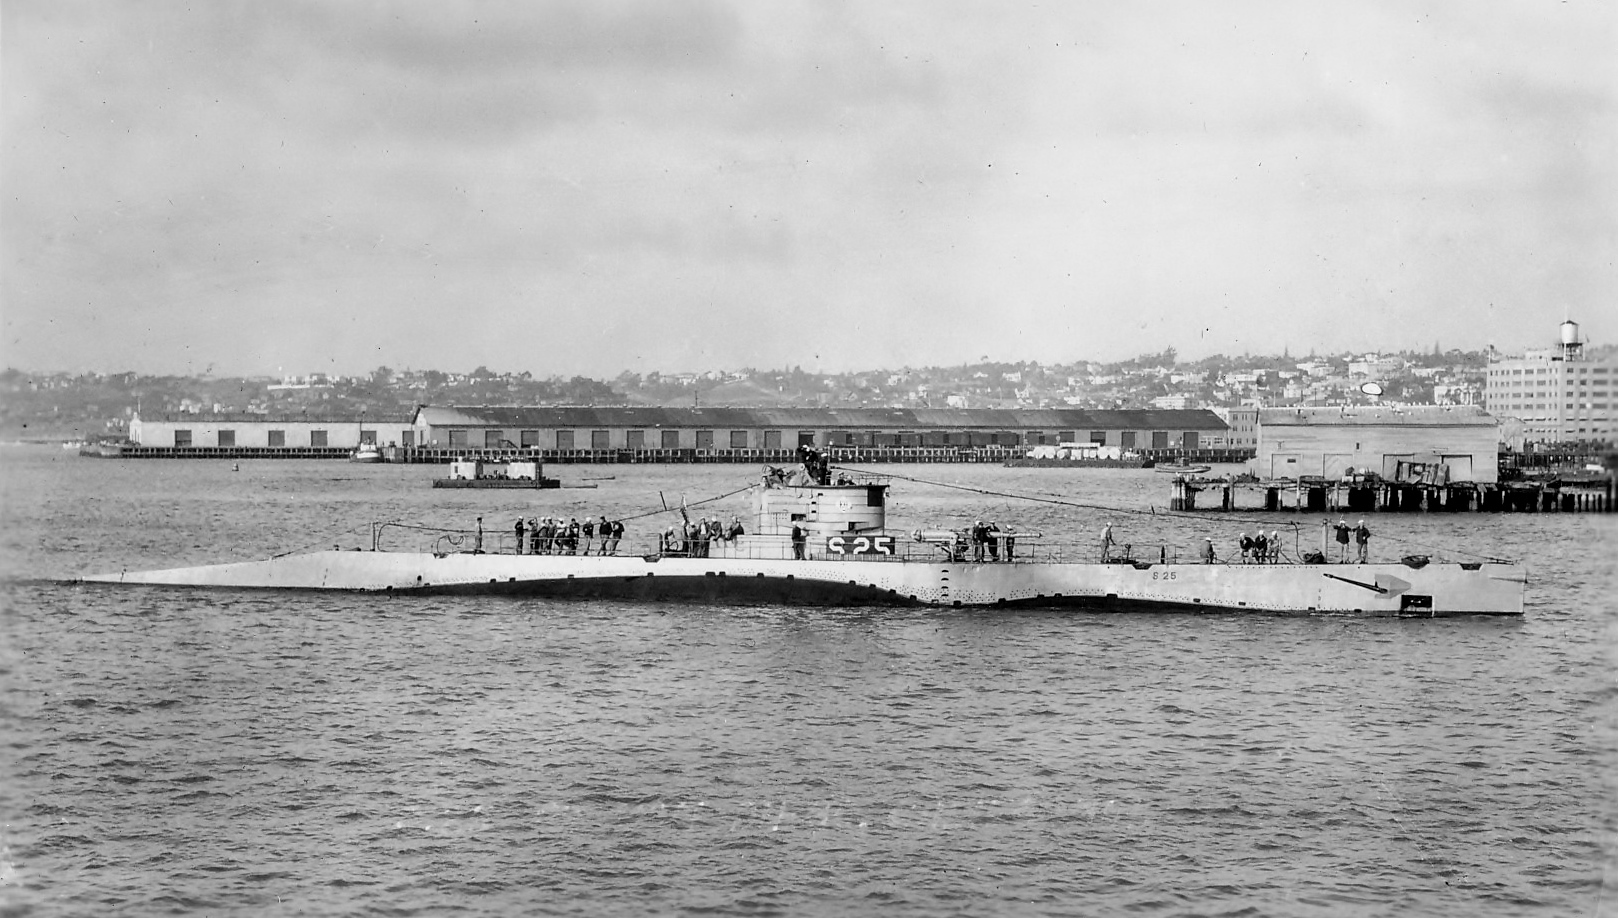 USS S-25 off Naval Station San Diego, California, United States, 1924-1928